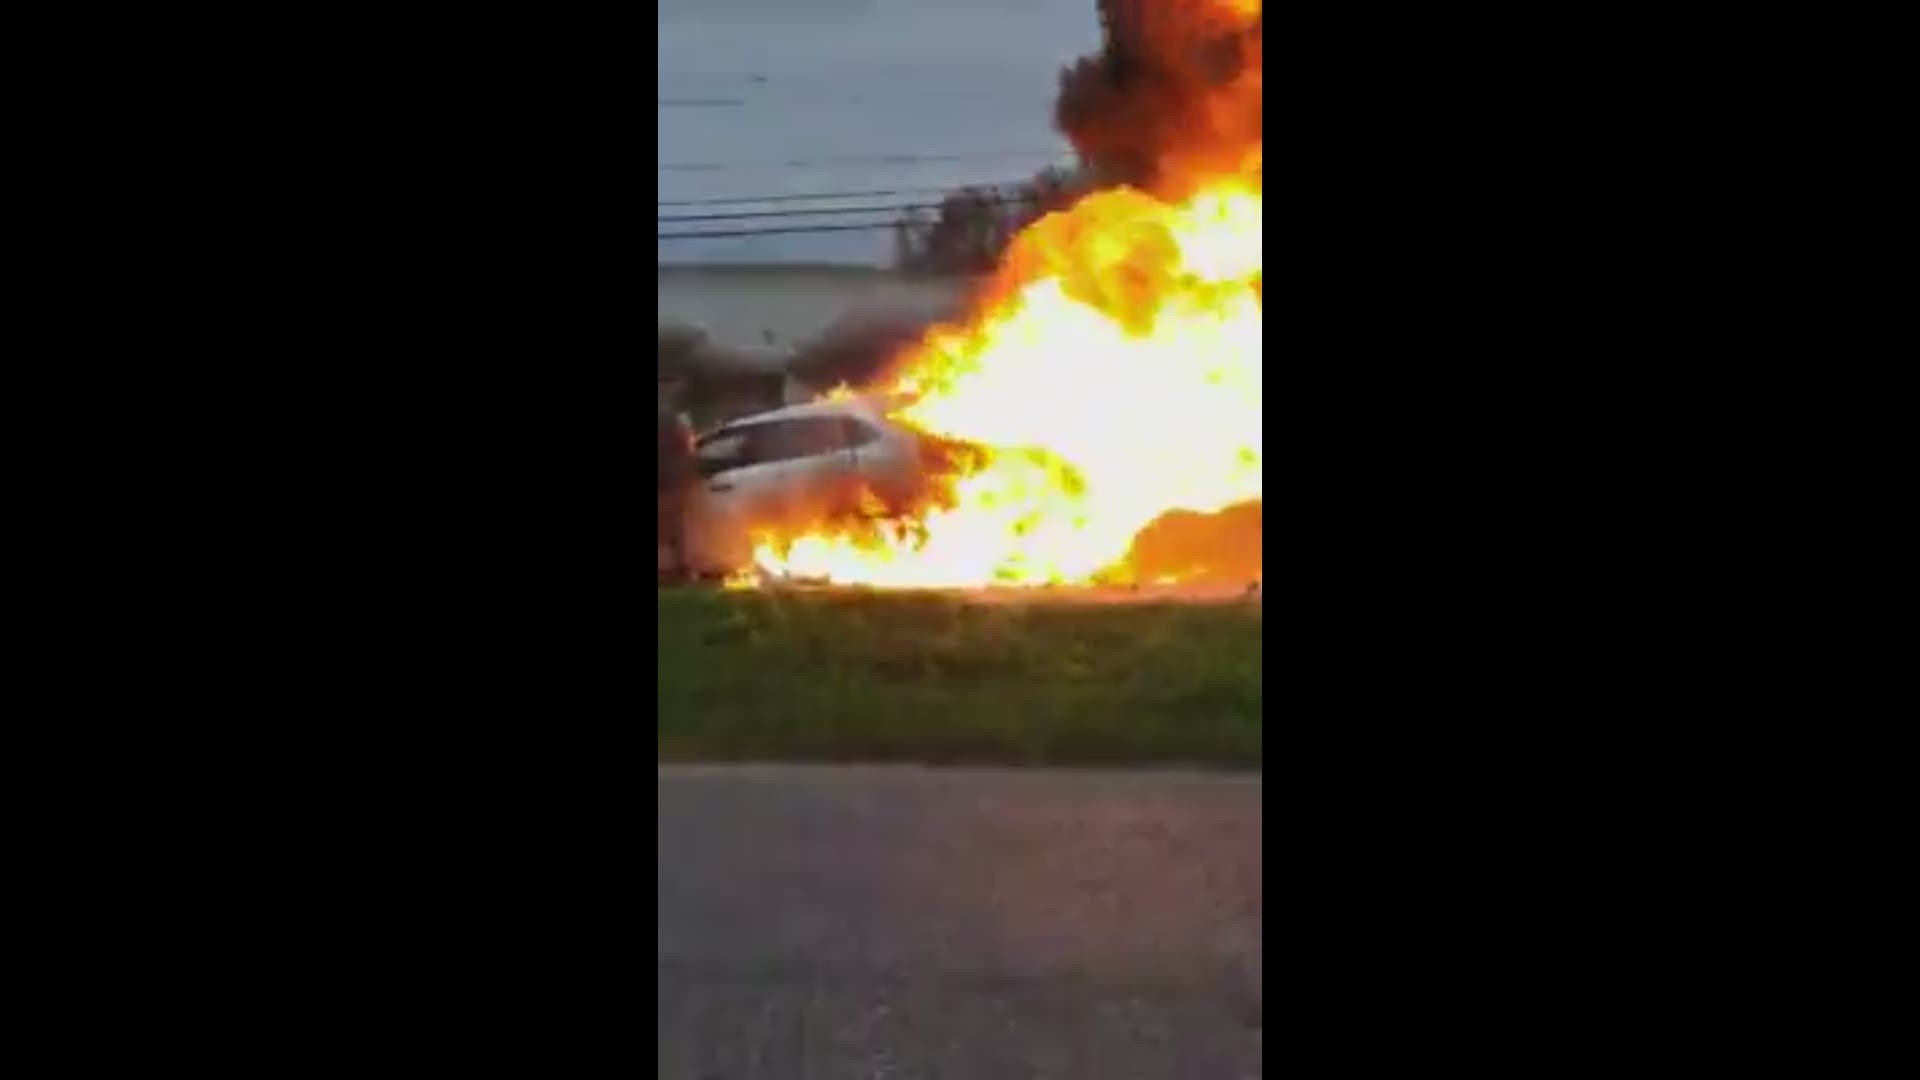 Three Good Samaritans who saw a car on fire, rushed to the scene to pull a driver from the vehicle. Video courtesy: Anita Haley